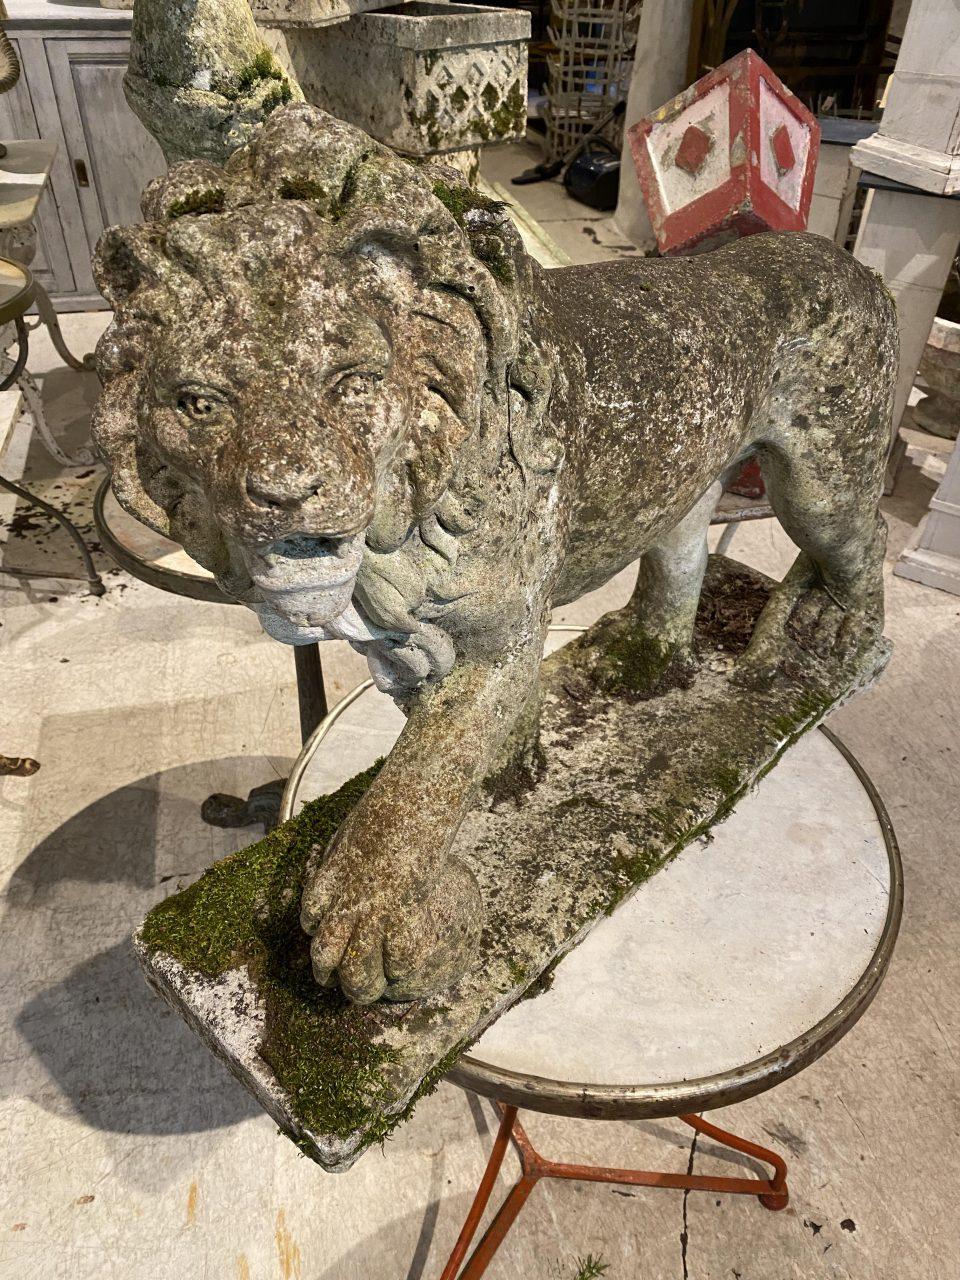 Exceptionally charming garden figure / statue, from circa 1940s-50s France. Cast in cement and shaped as a regal lion. The lion statue is classically designed, with a full mane and a paw resting on a globe – a symbol of power.

Originates from an